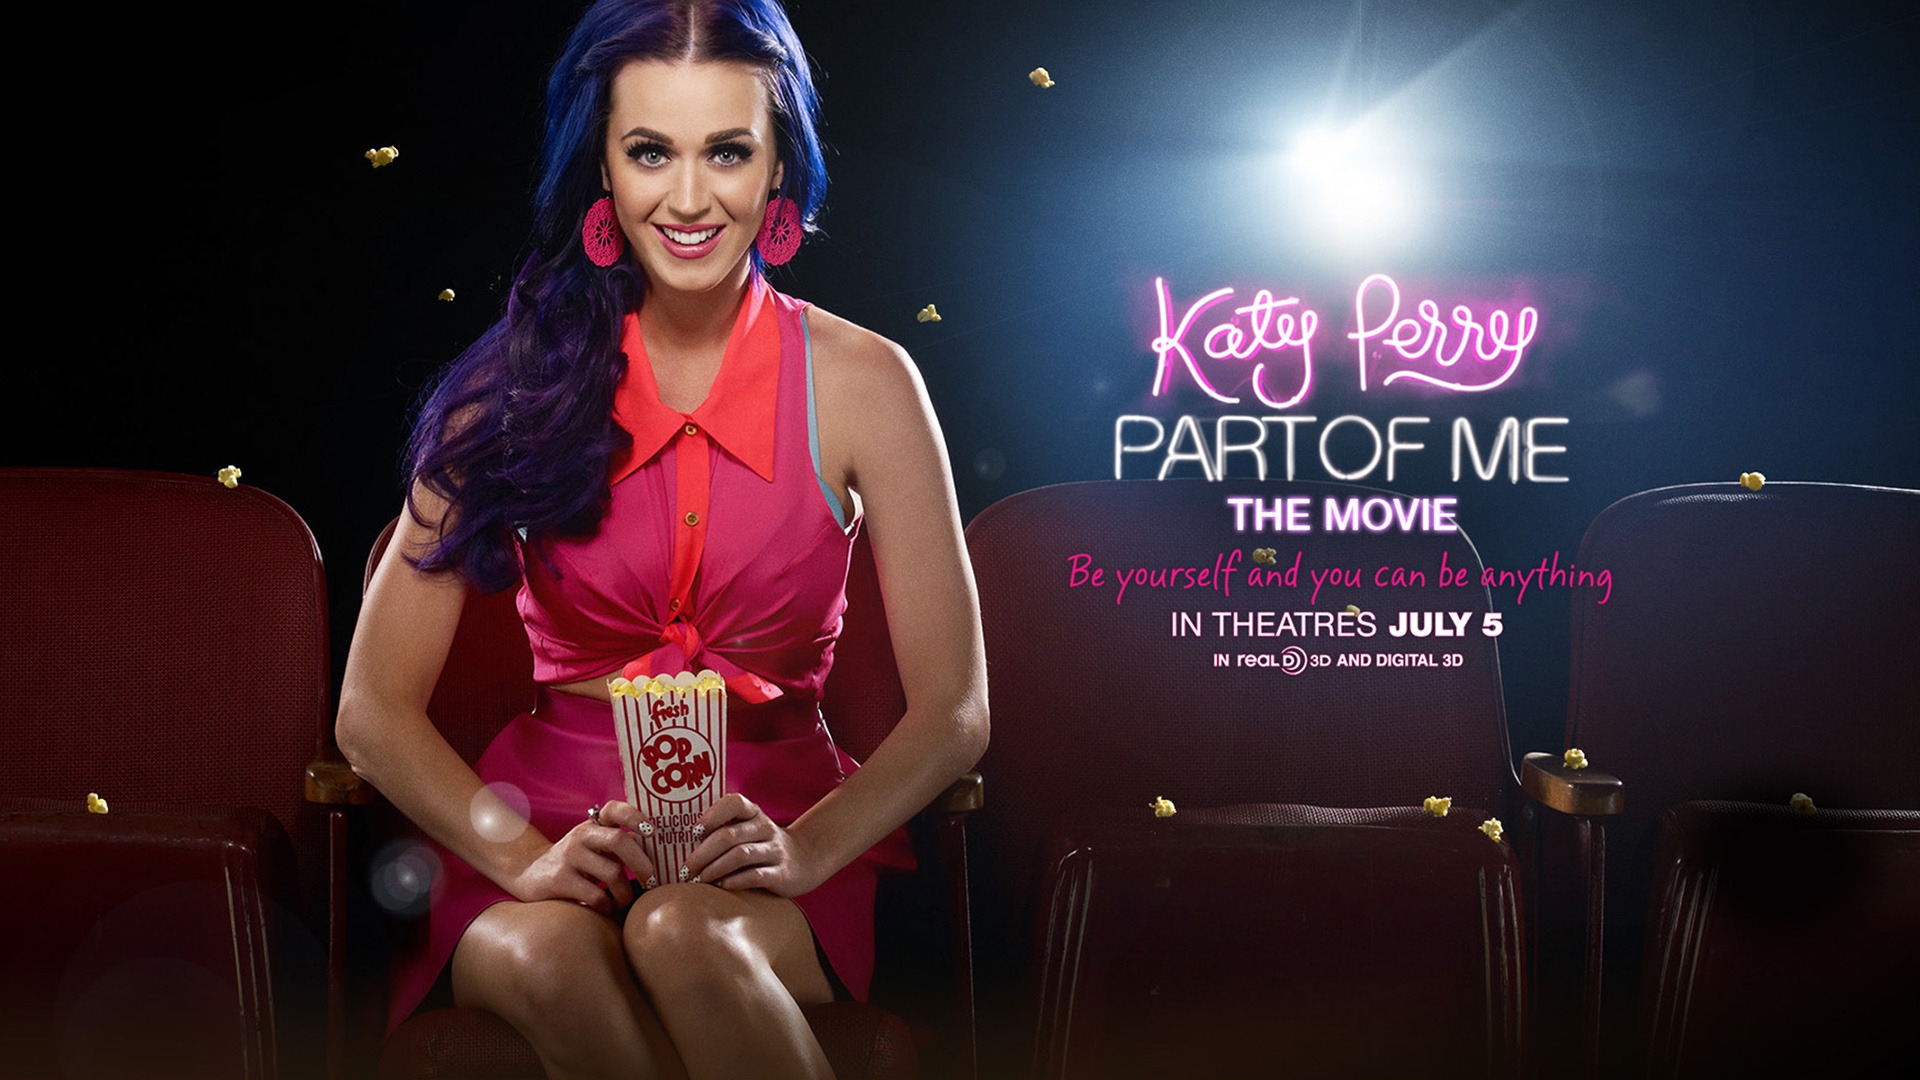 Katy Perry Part Of Me Movie 2012 for 1920 x 1080 HDTV 1080p resolution